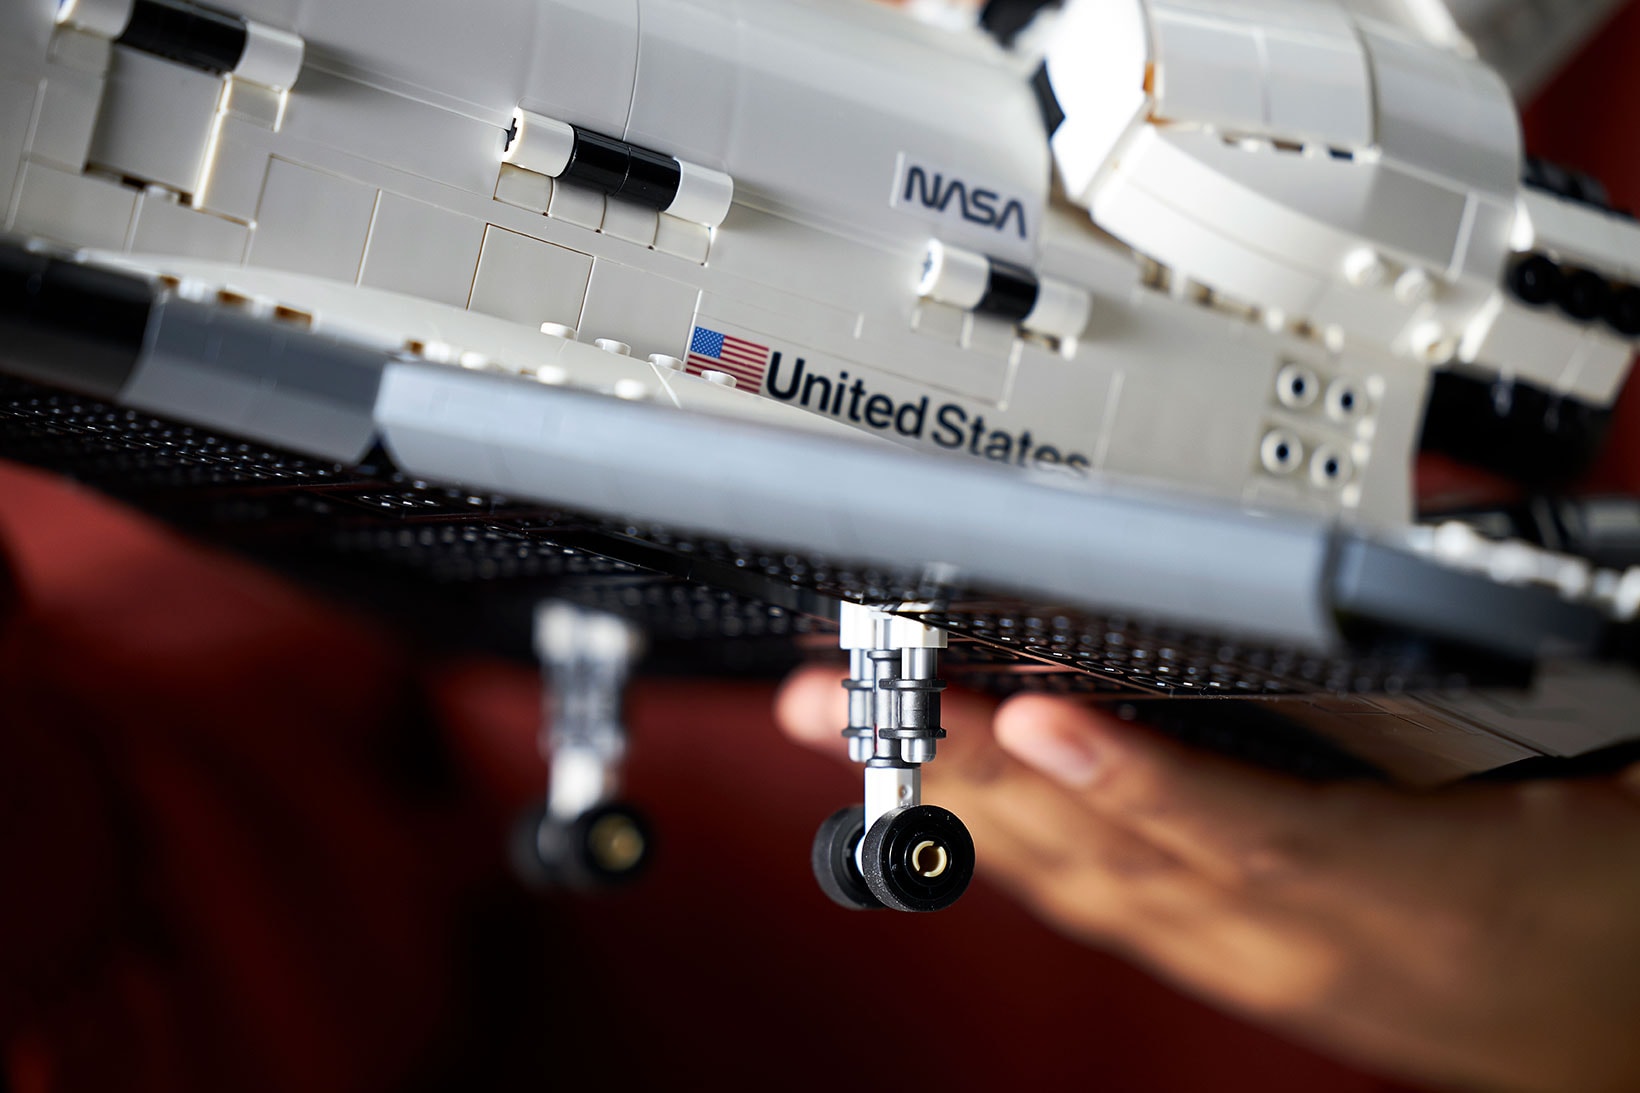 lego nasa discovery space shuttle set collaboration kathy sullivan astronaut sts 31 mission close up